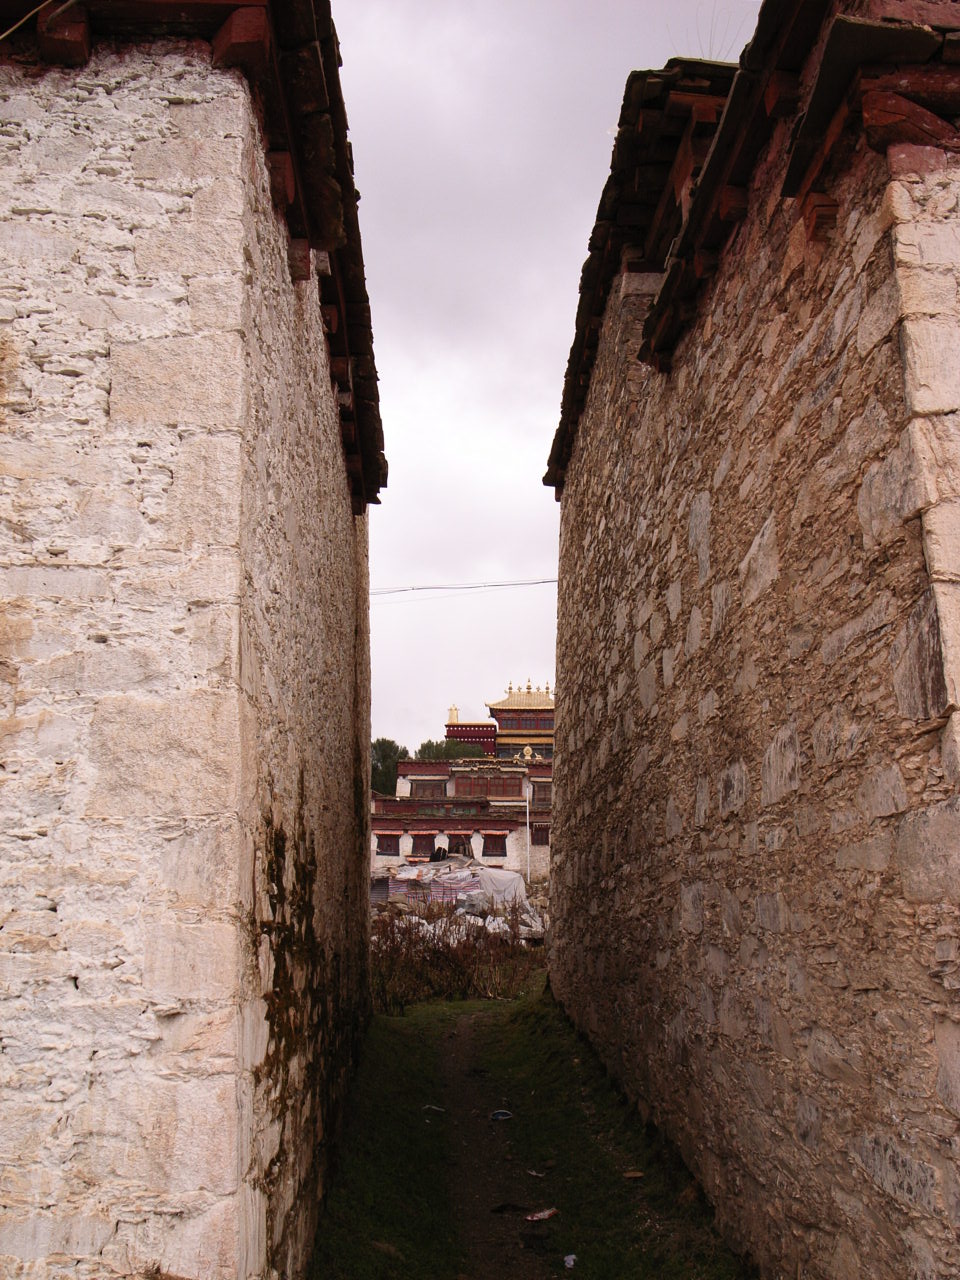 an image of a narrow street in a small town